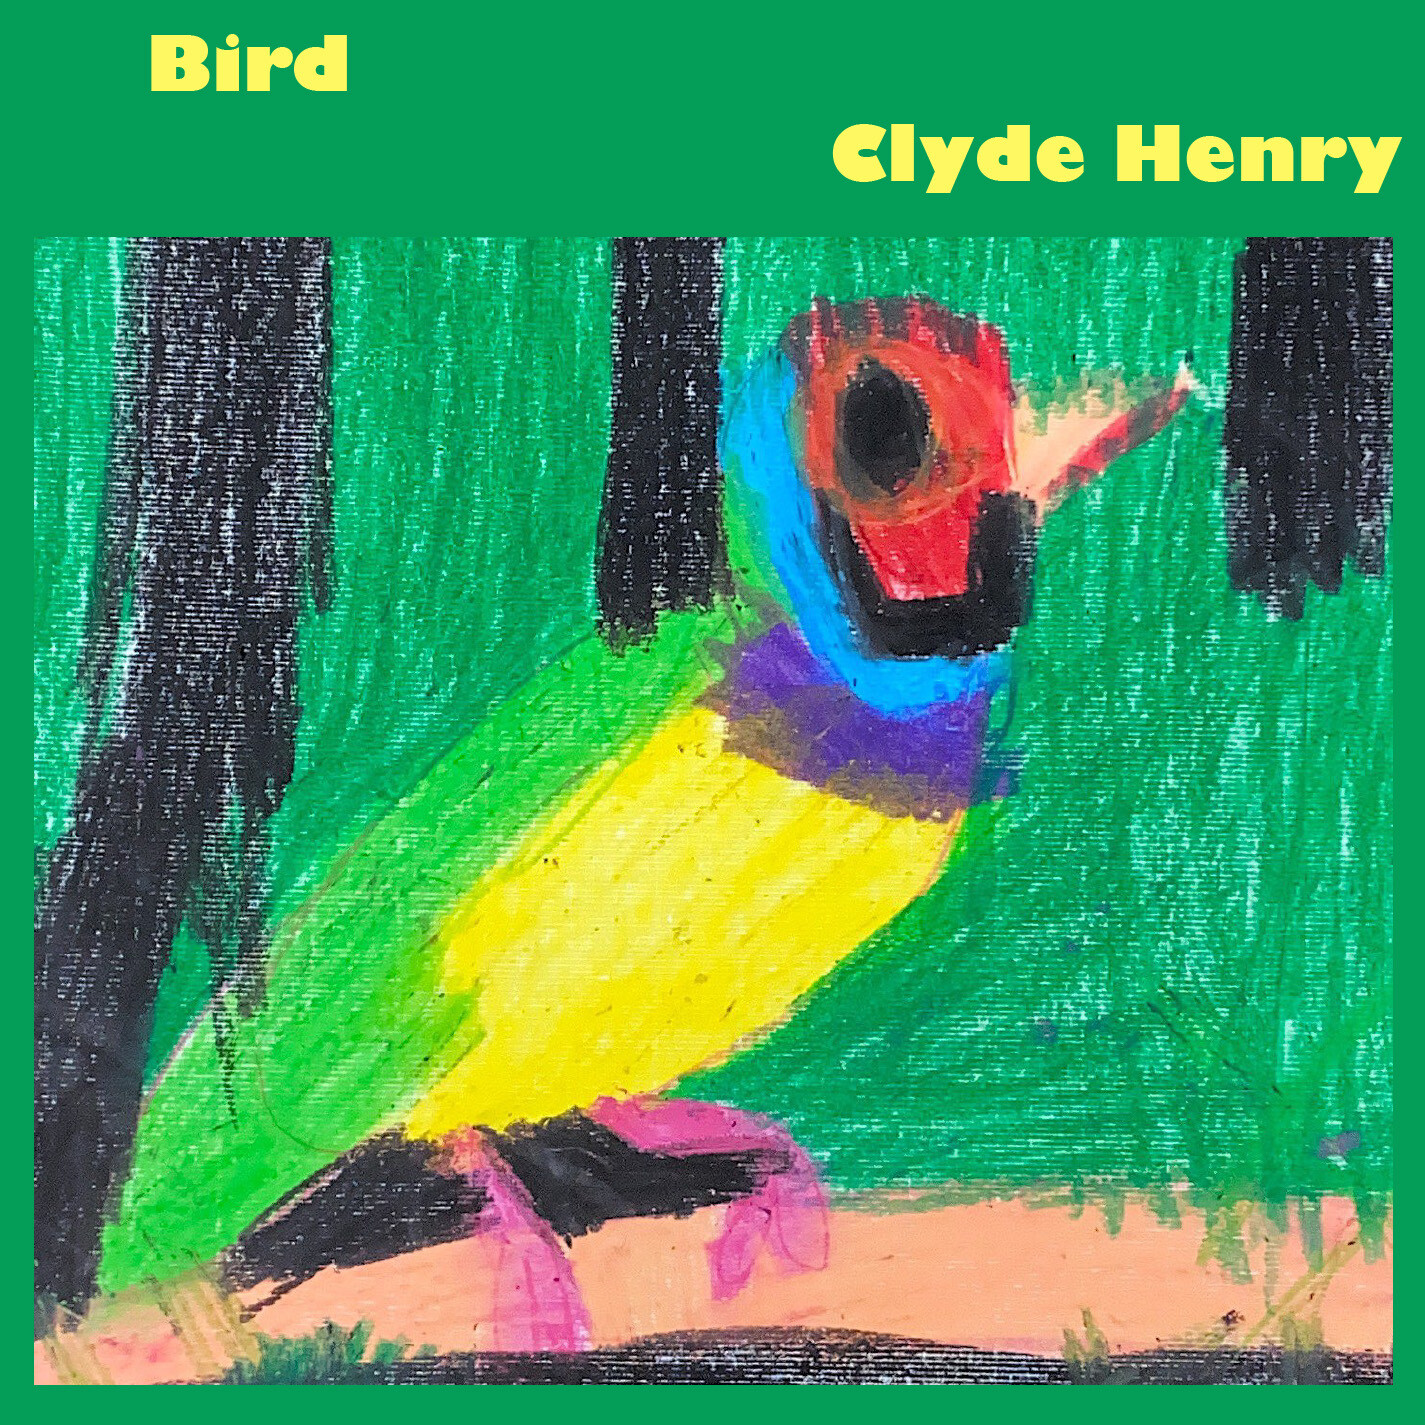 Bird by Clyde Henry